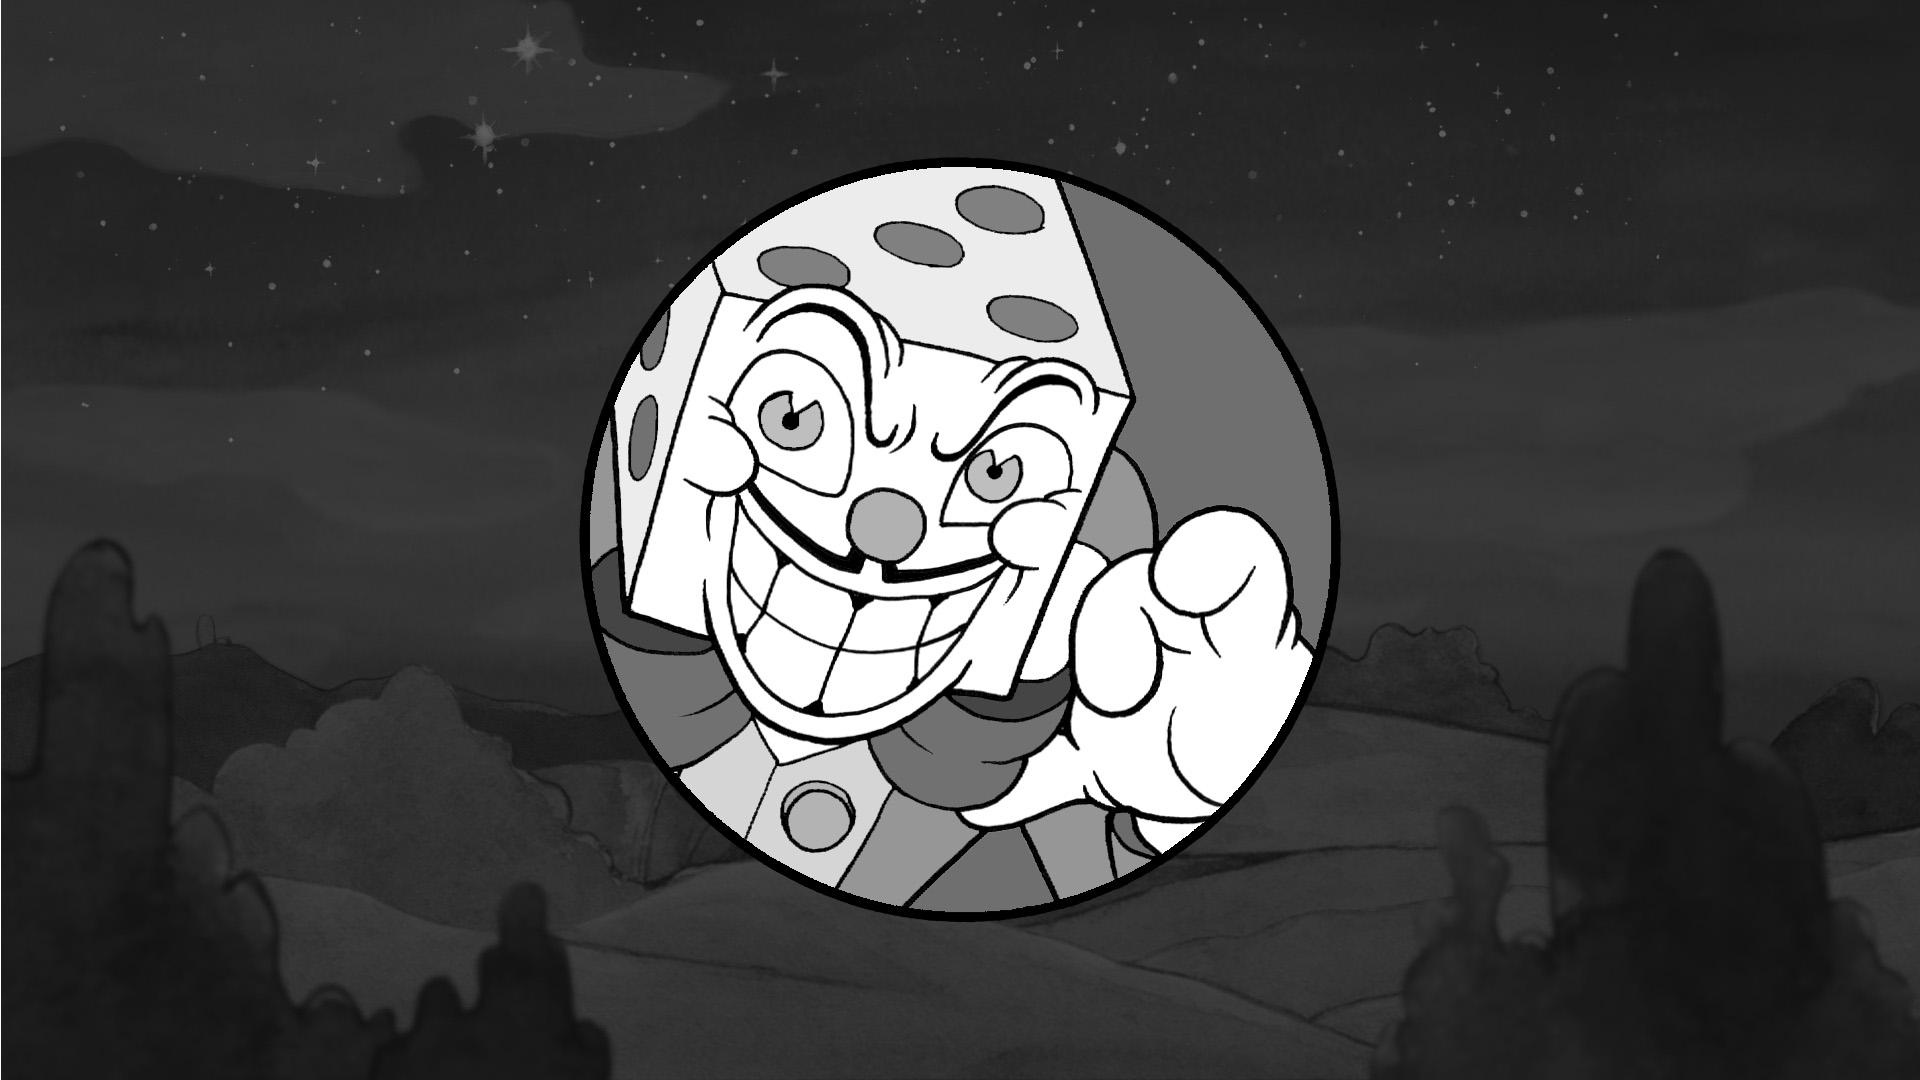 Cuphead, Steam Trading Cards Wiki